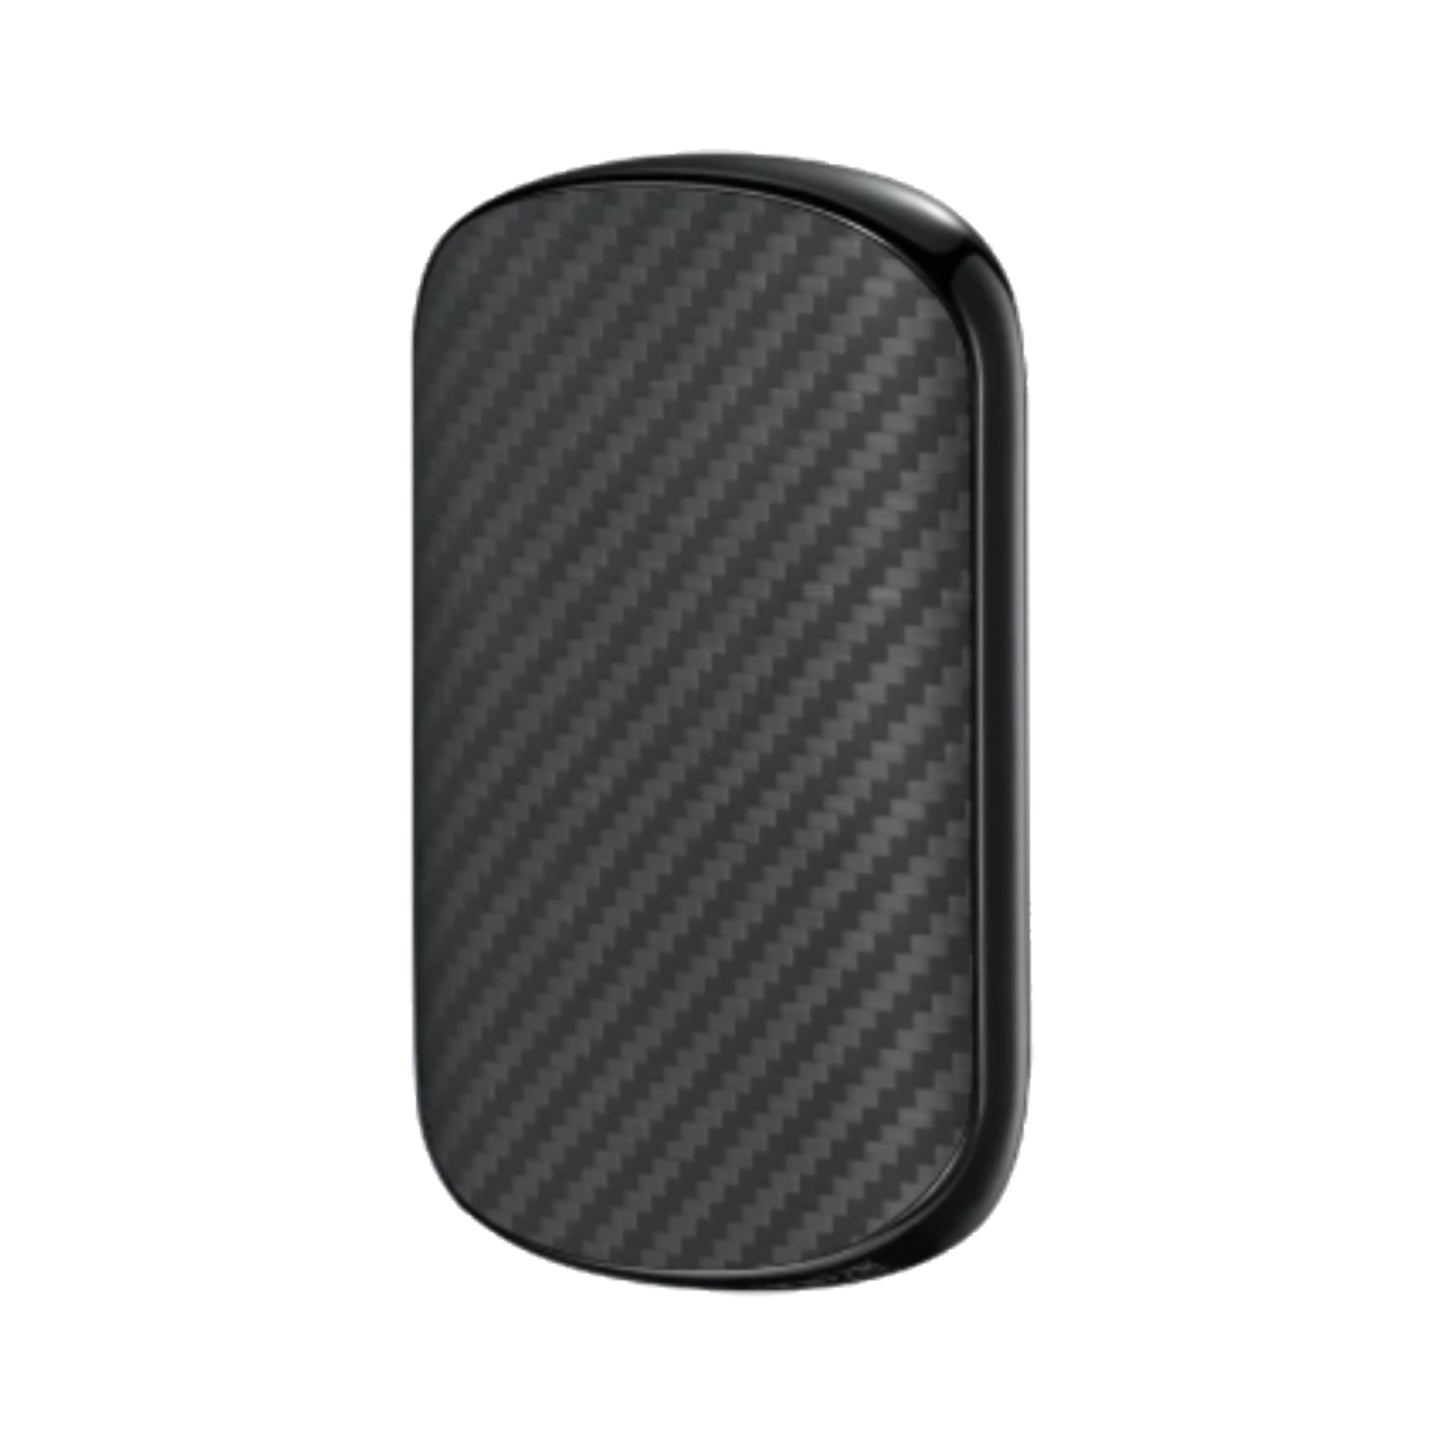 PITAKA MagEZ Slider 2 with 4000mah Power Bank - Compact 3-in-1 Wireless Charger